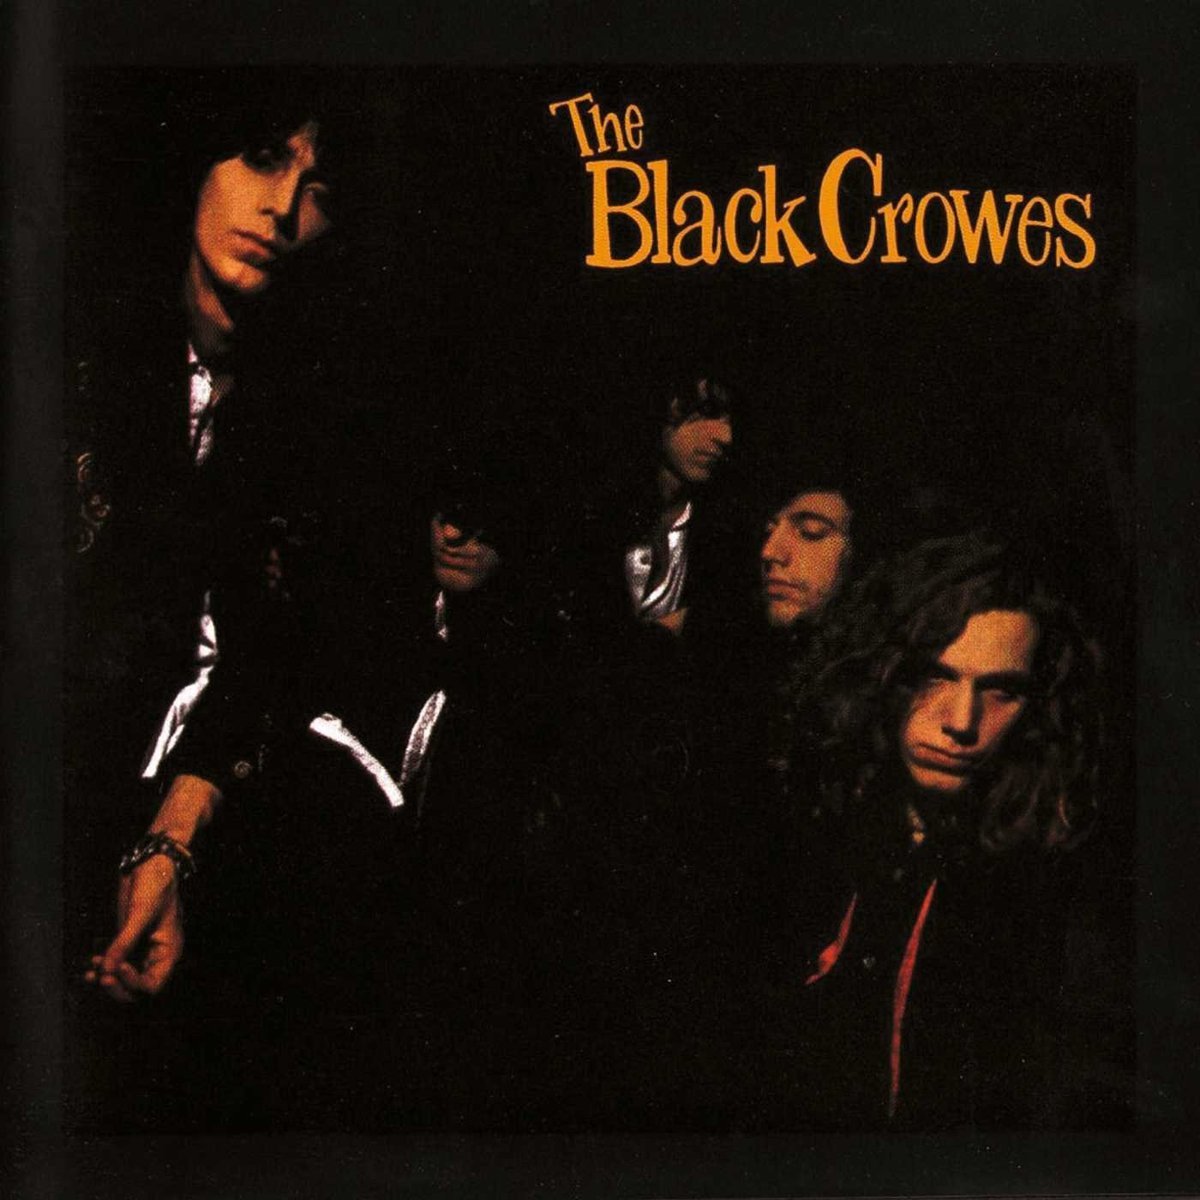 The Black Crowes / First four albums resissued on 180g vinyl